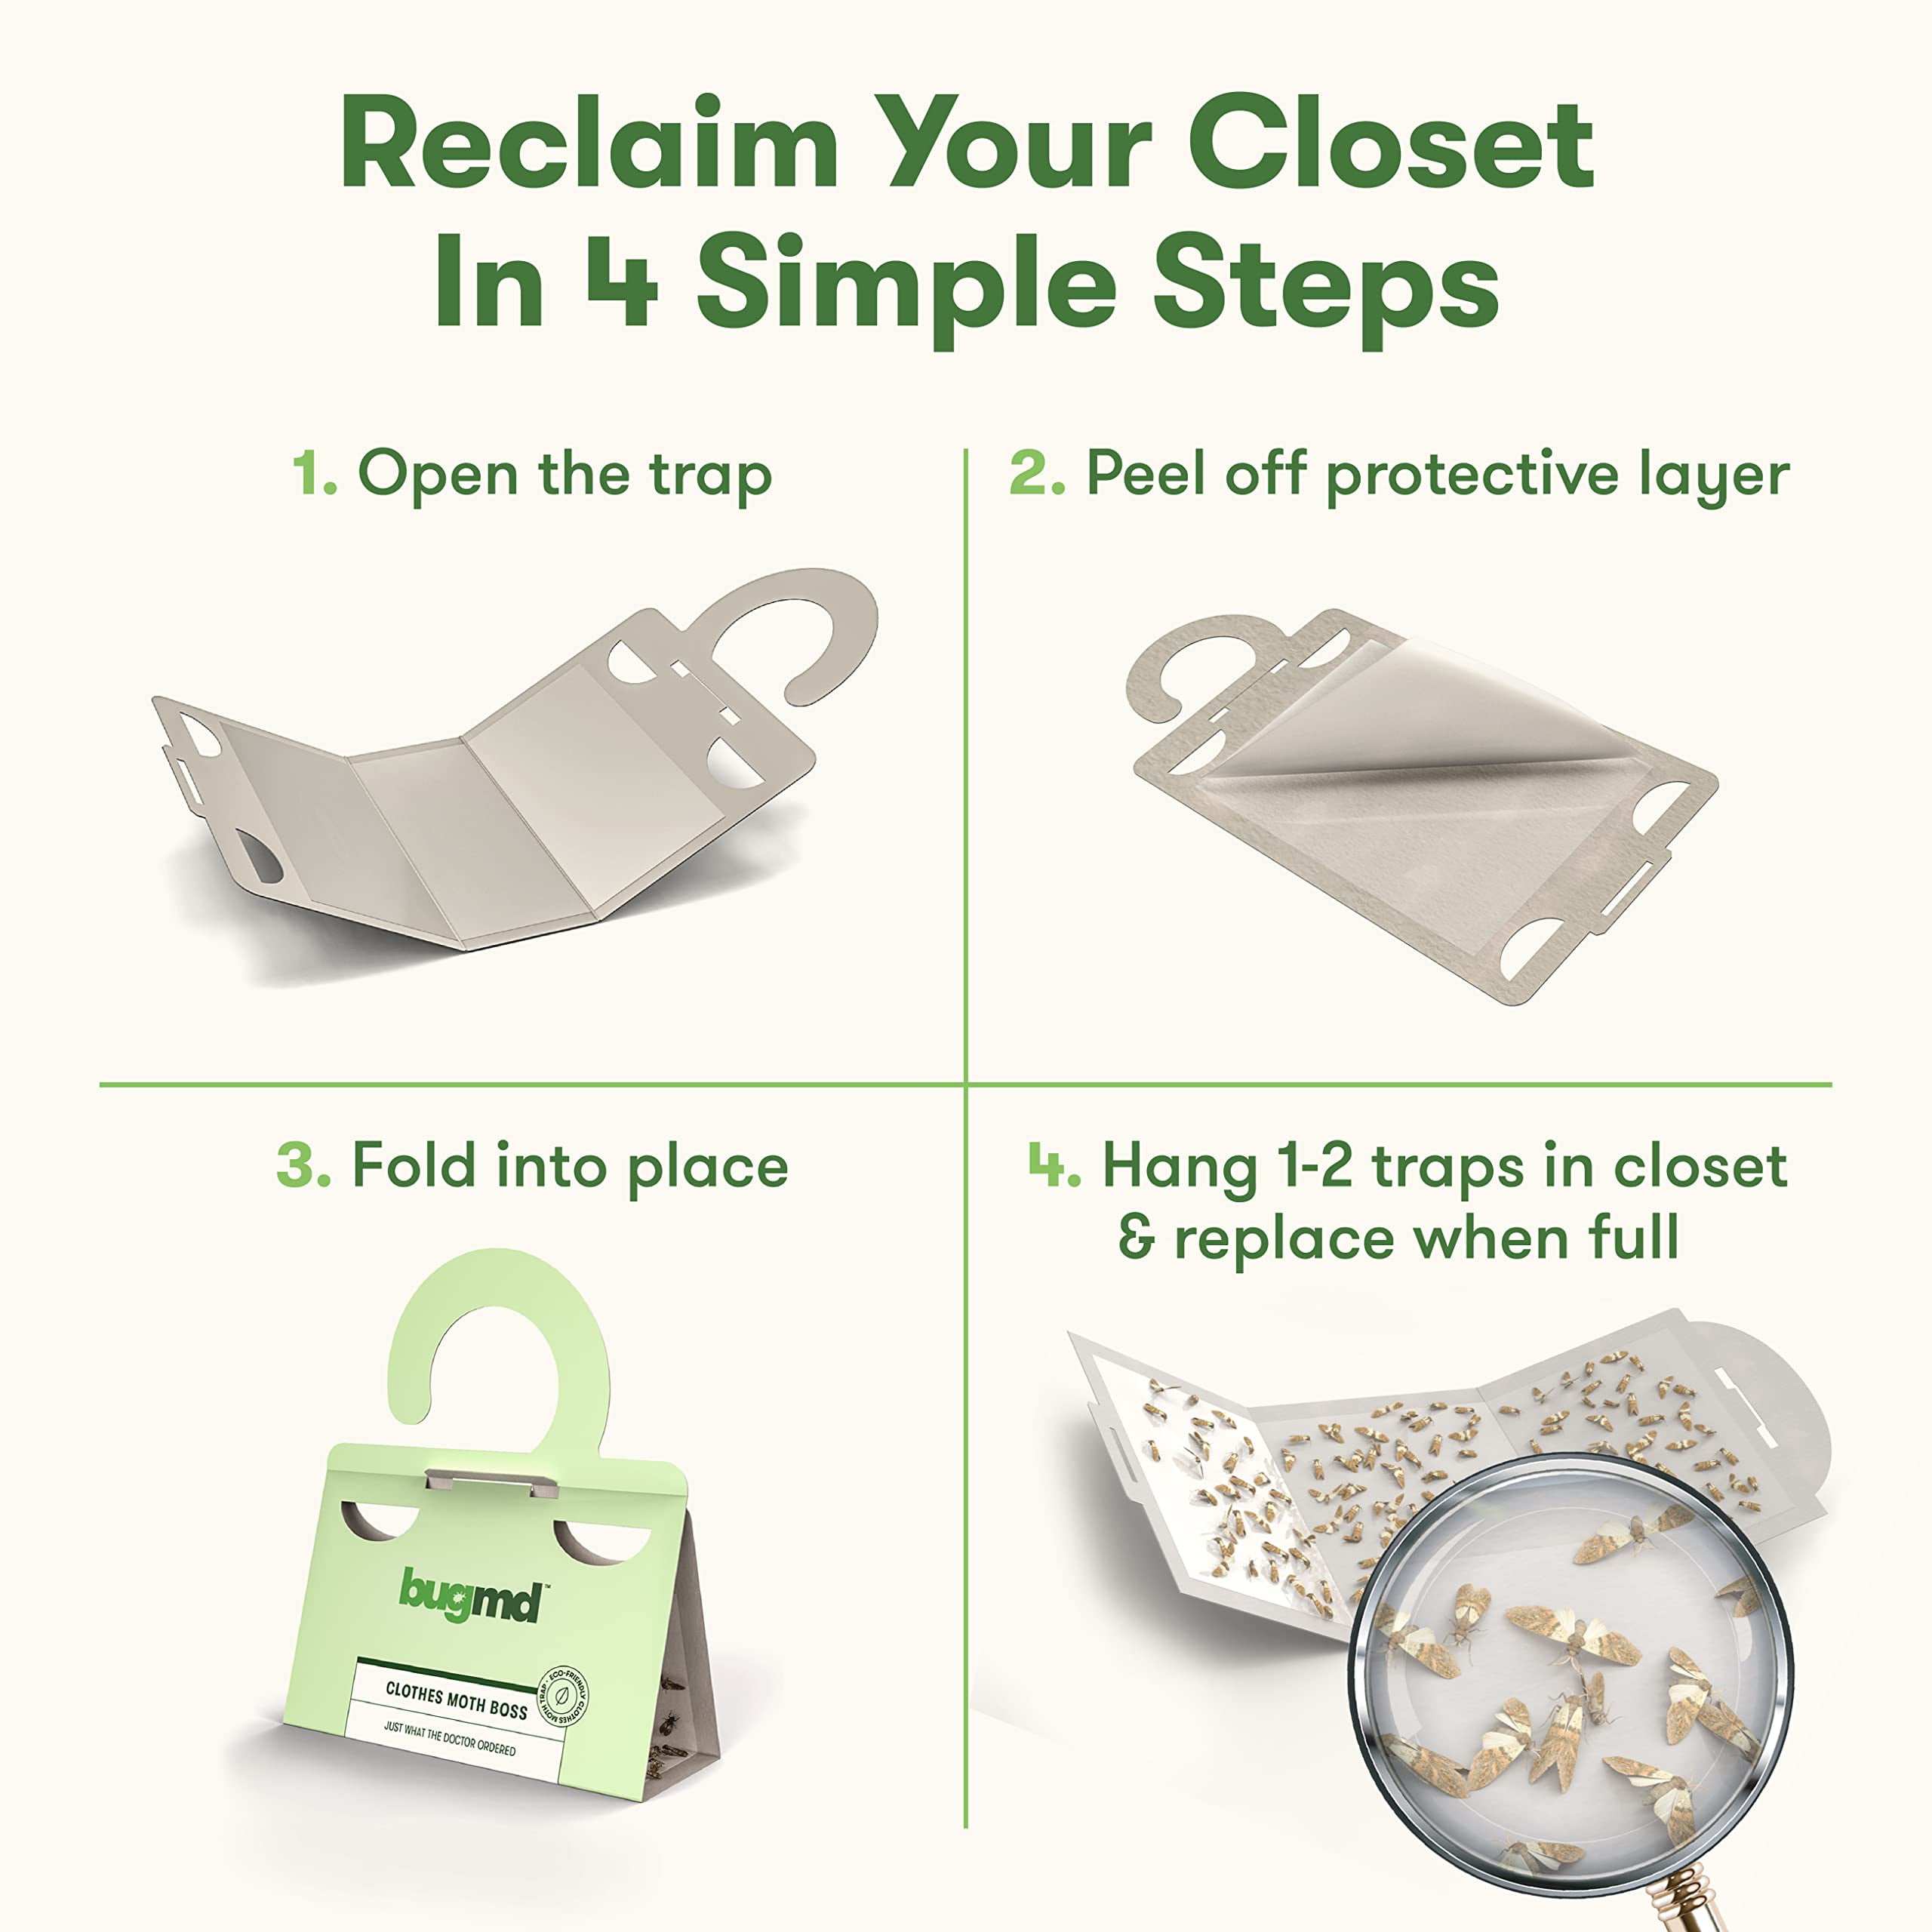 How To Keep Bugs That Damage Your Clothes Out Of Your Closet…